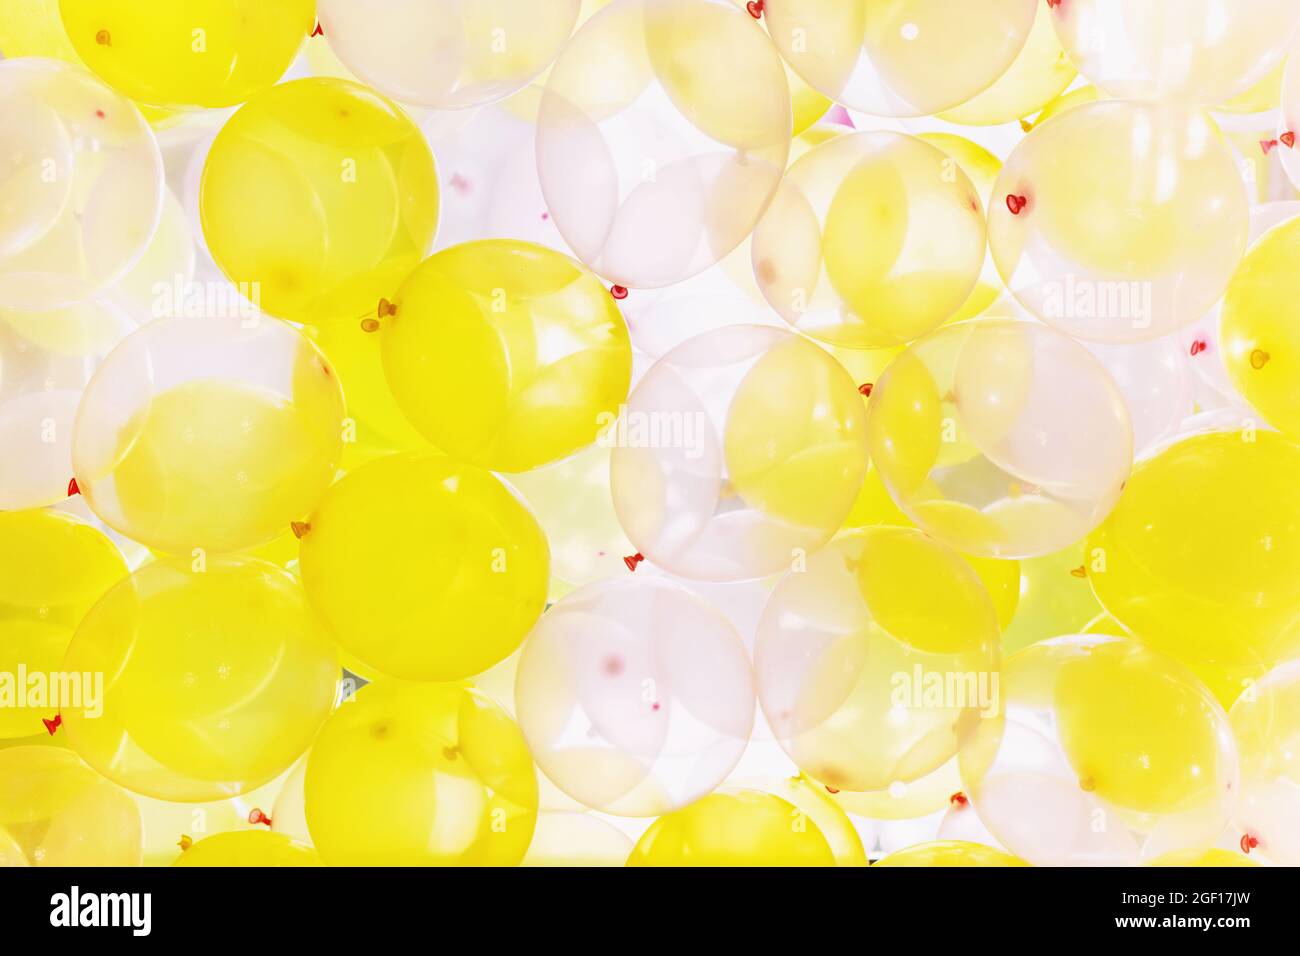 Background made of yellow and white balloons. Stock Photo